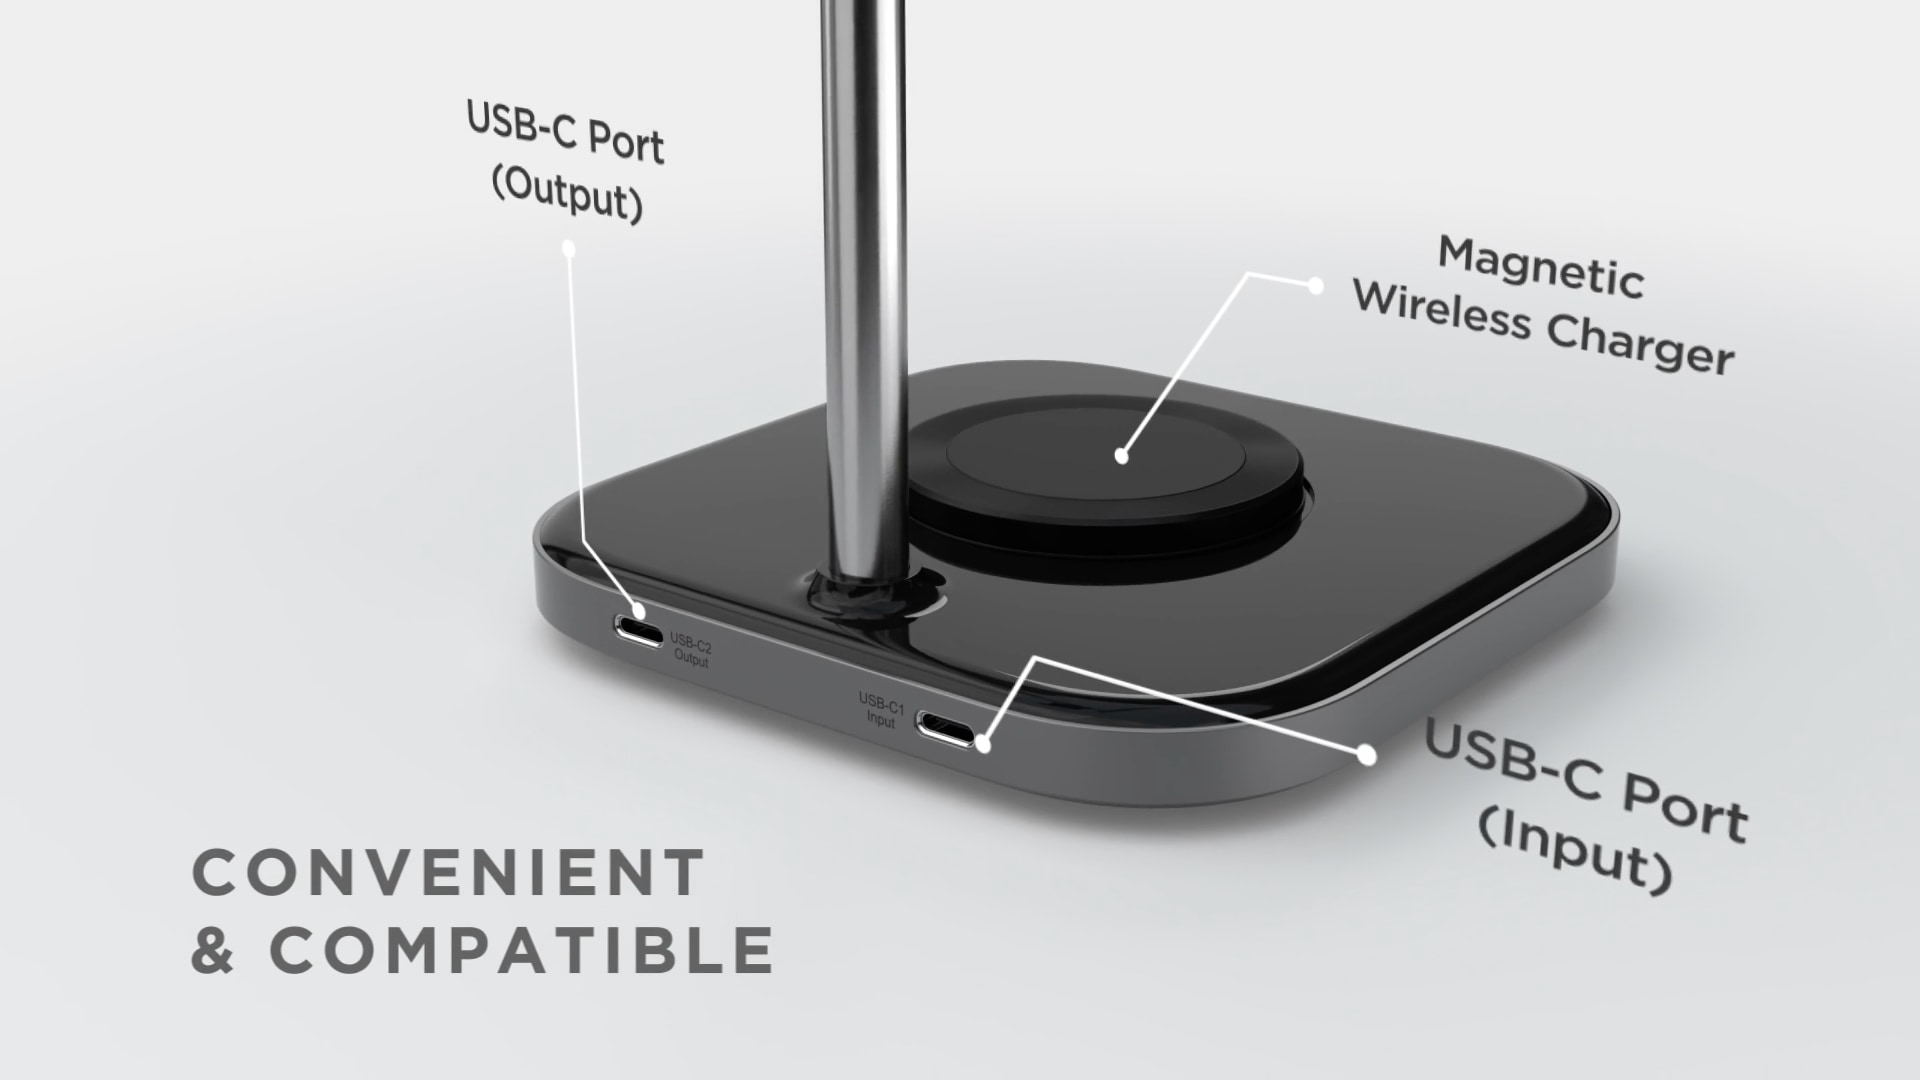 A still image from Satechi's promotional video showing USB-C and other charging options for its 2-in-1 Headphone Stand with Wireless Charger